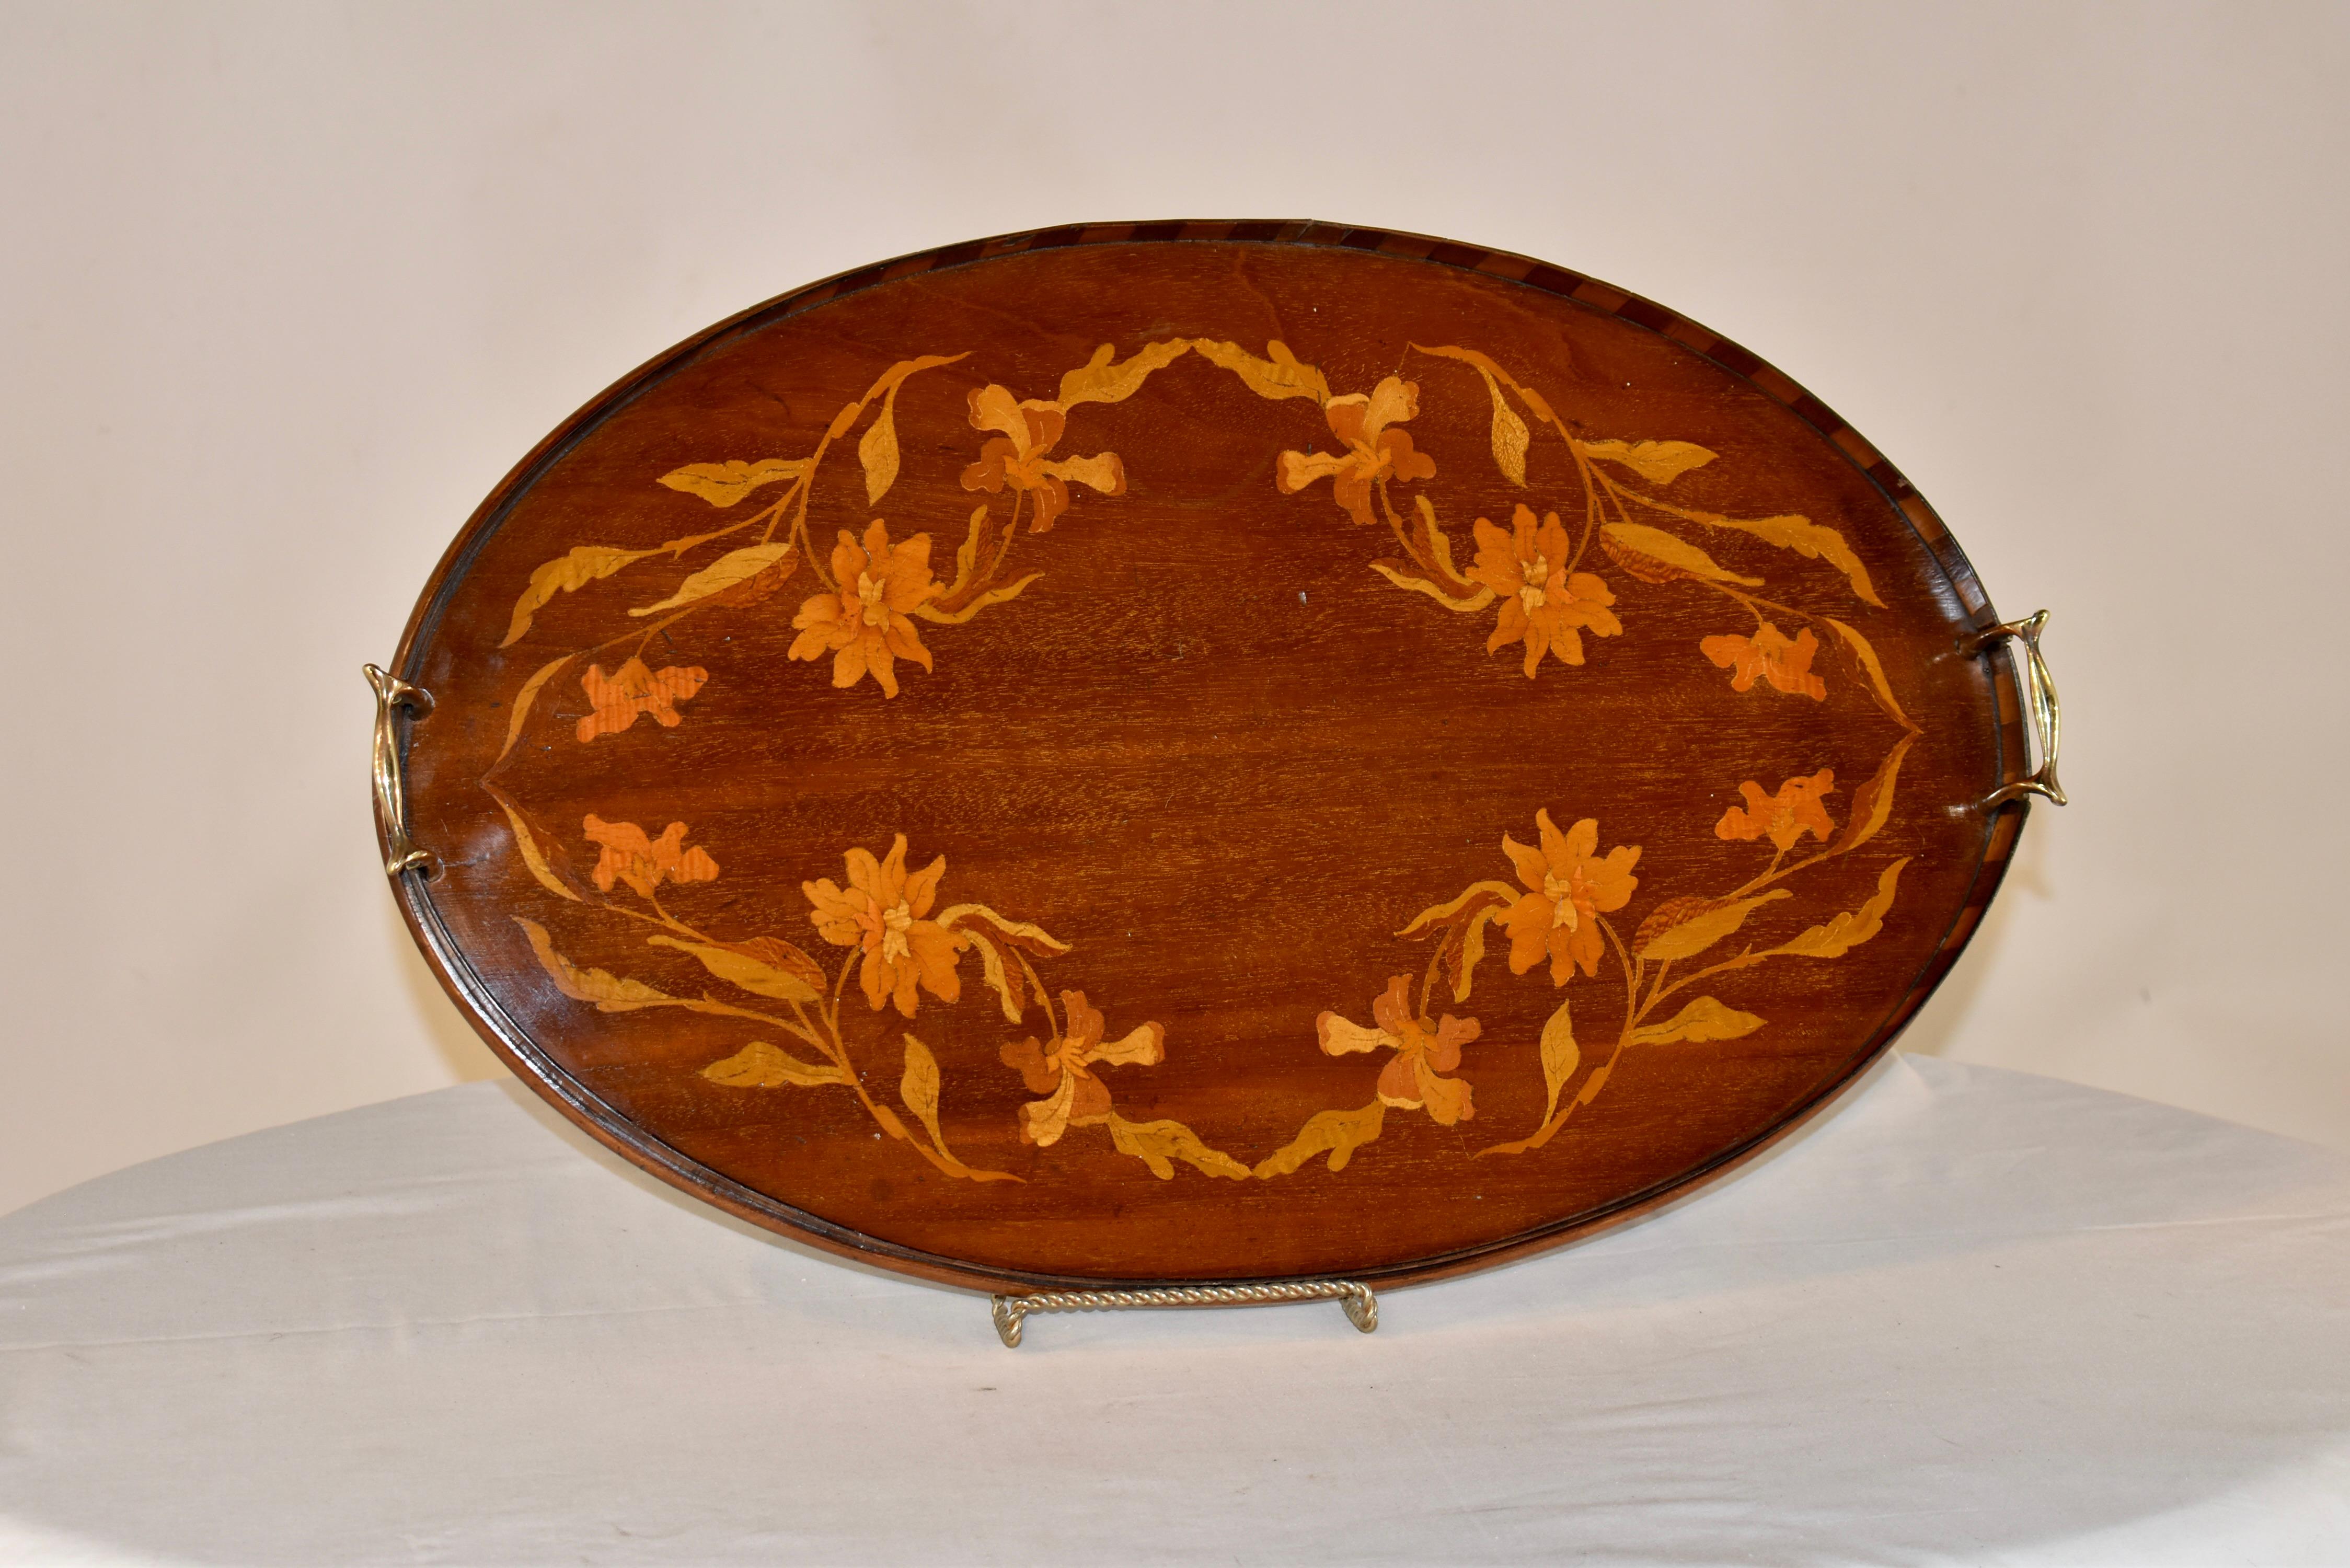 19th century mahogany tray from England inlaid in a lovely pattern with florals and vines. The tray has a gallery, which is in a lovely dark and light mahogany contrast, for added design interest. The handles are hand cast brass.